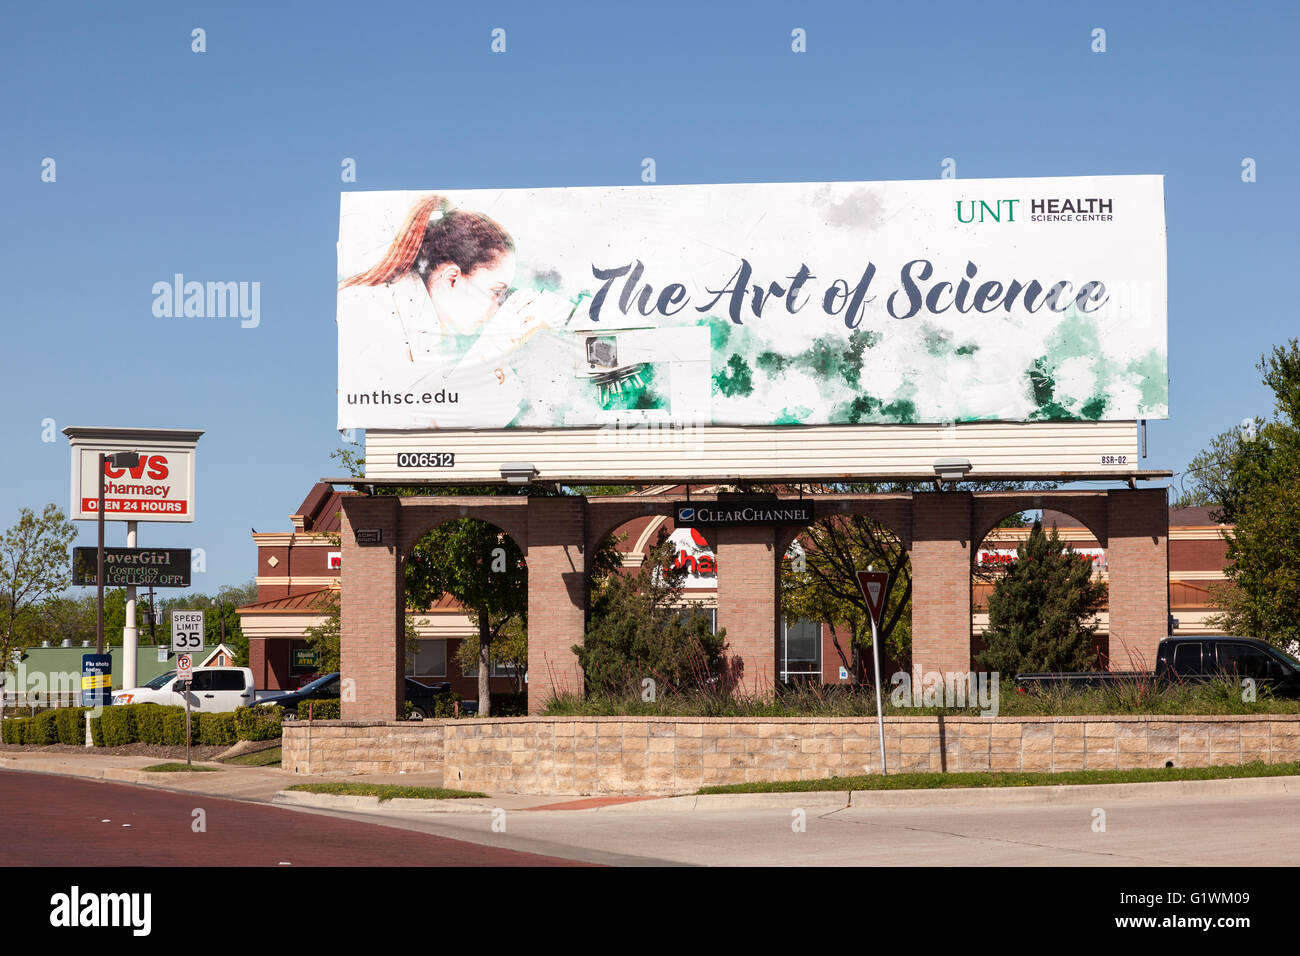 The Art of Science - the University of North Texas Health Science Center in Fort Worth Stock Photo